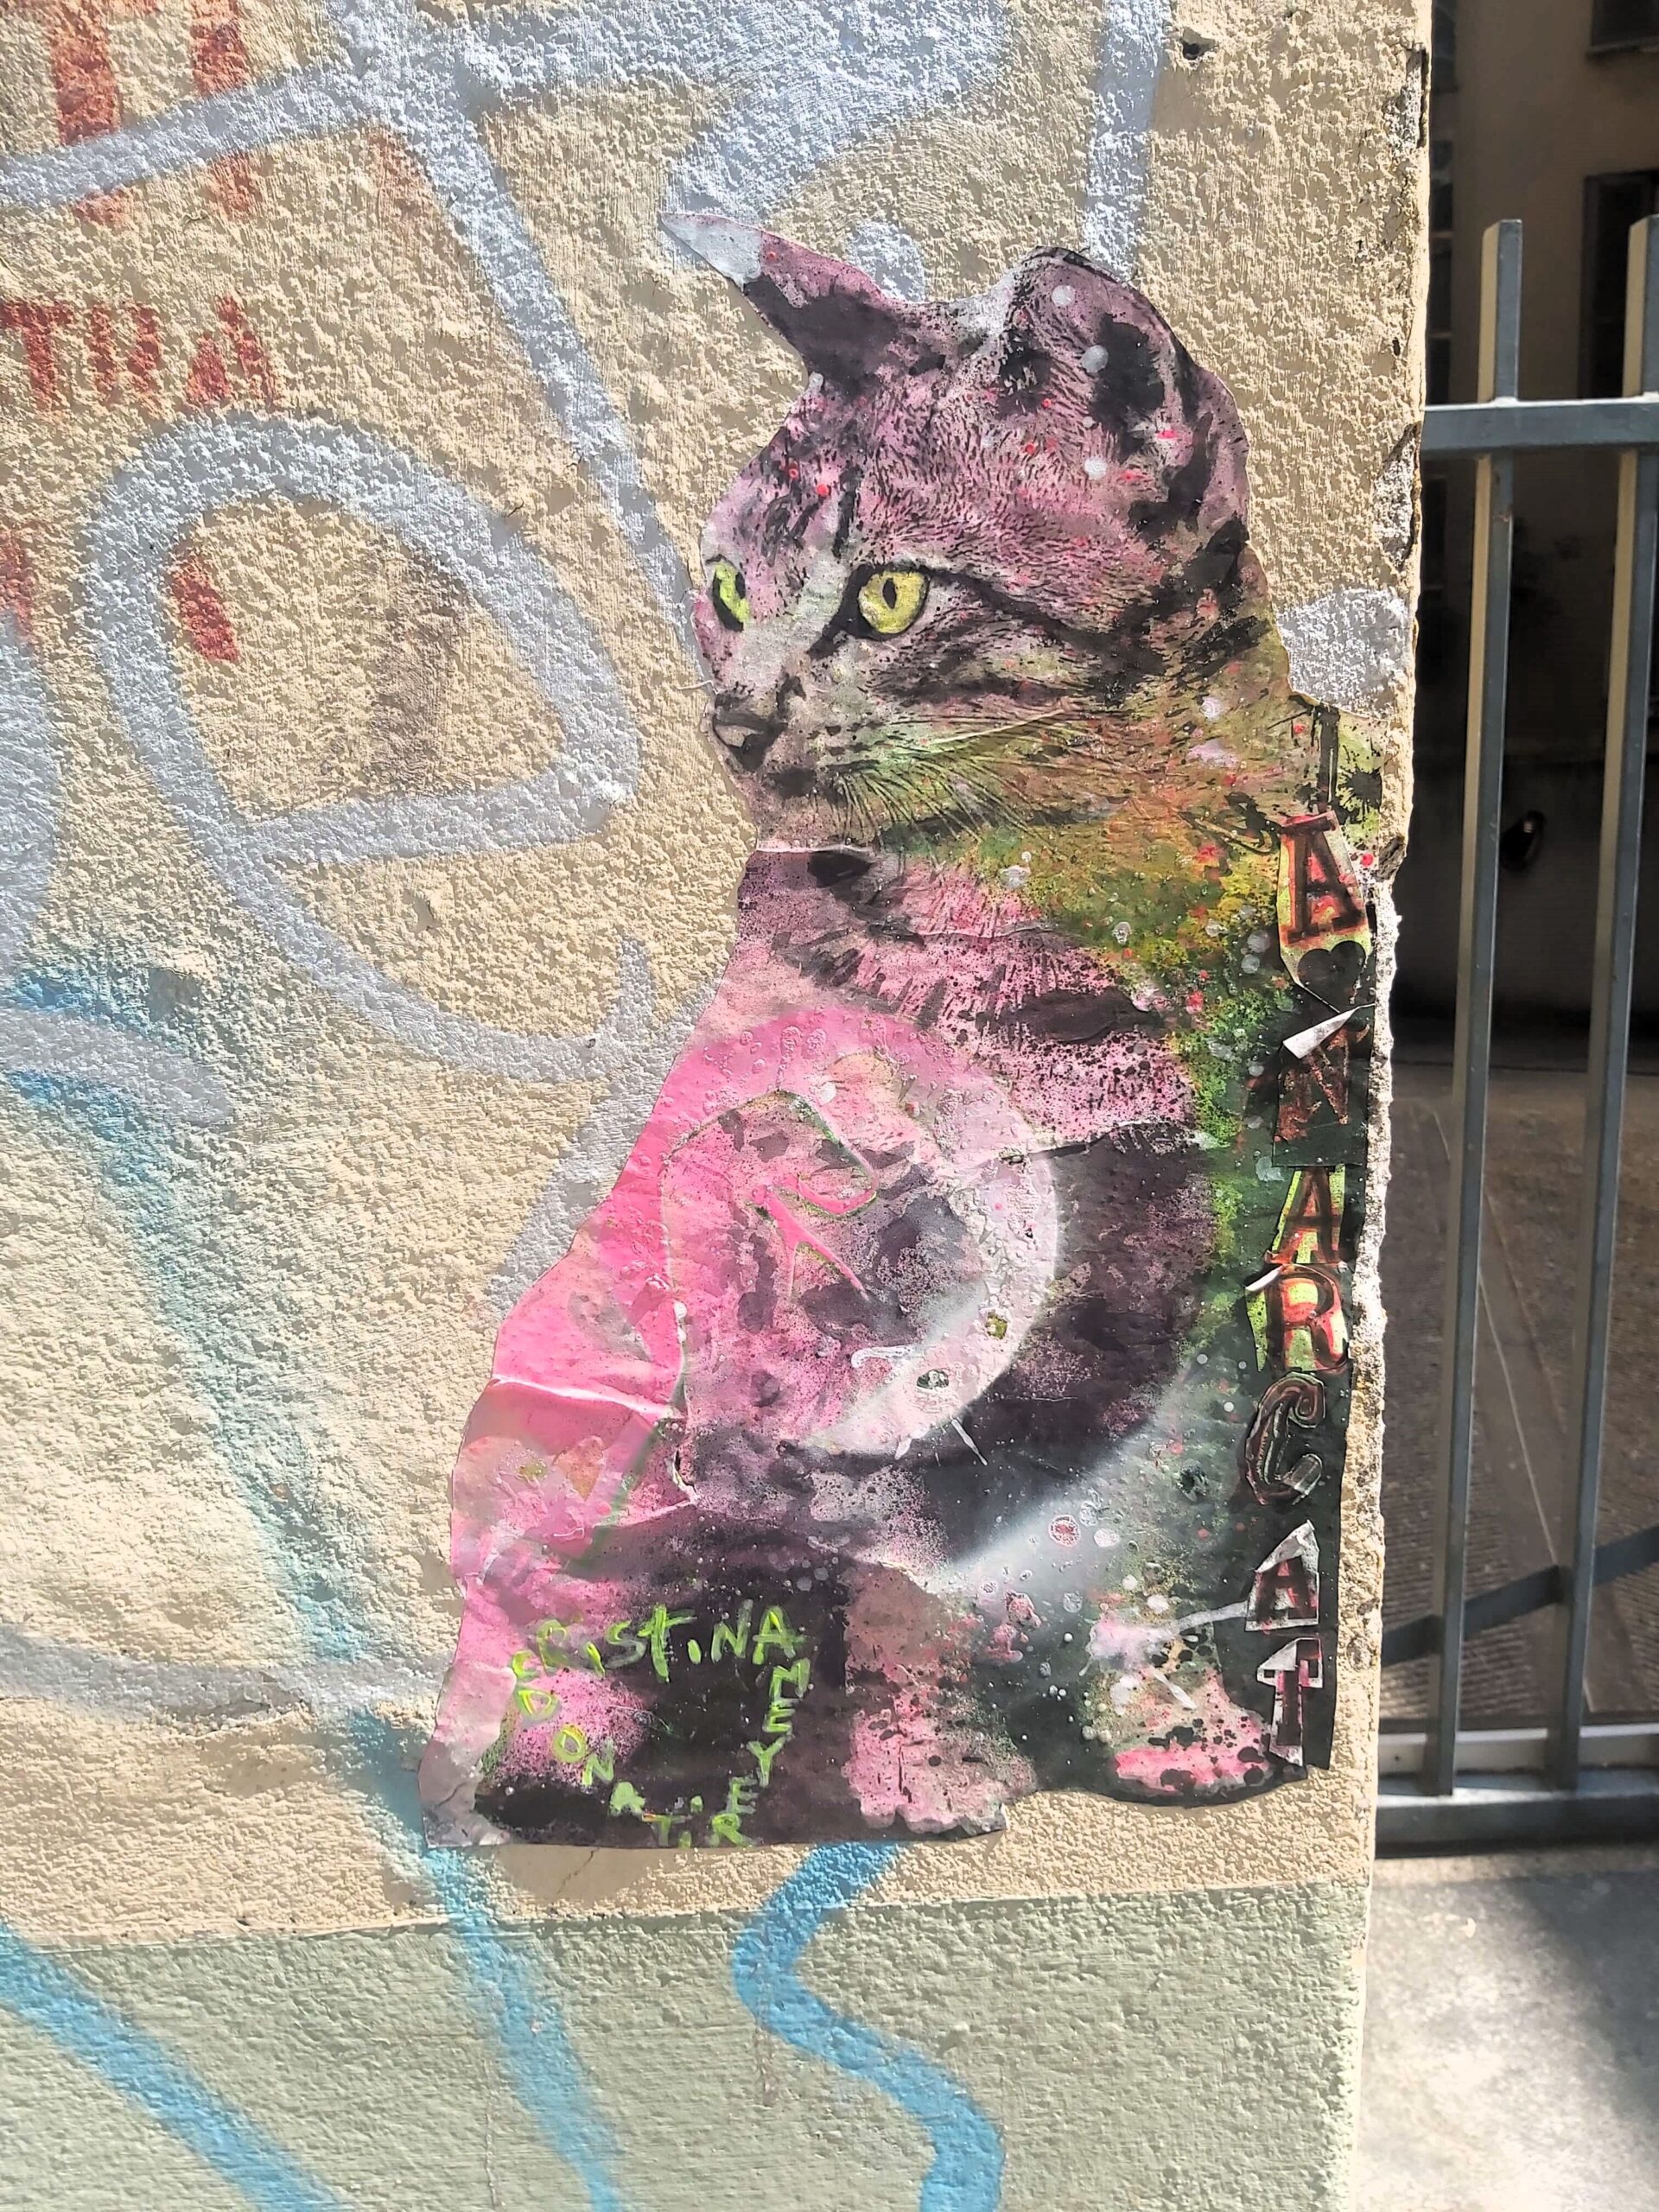 A graffiti image of a pink cat in Milan, Italy